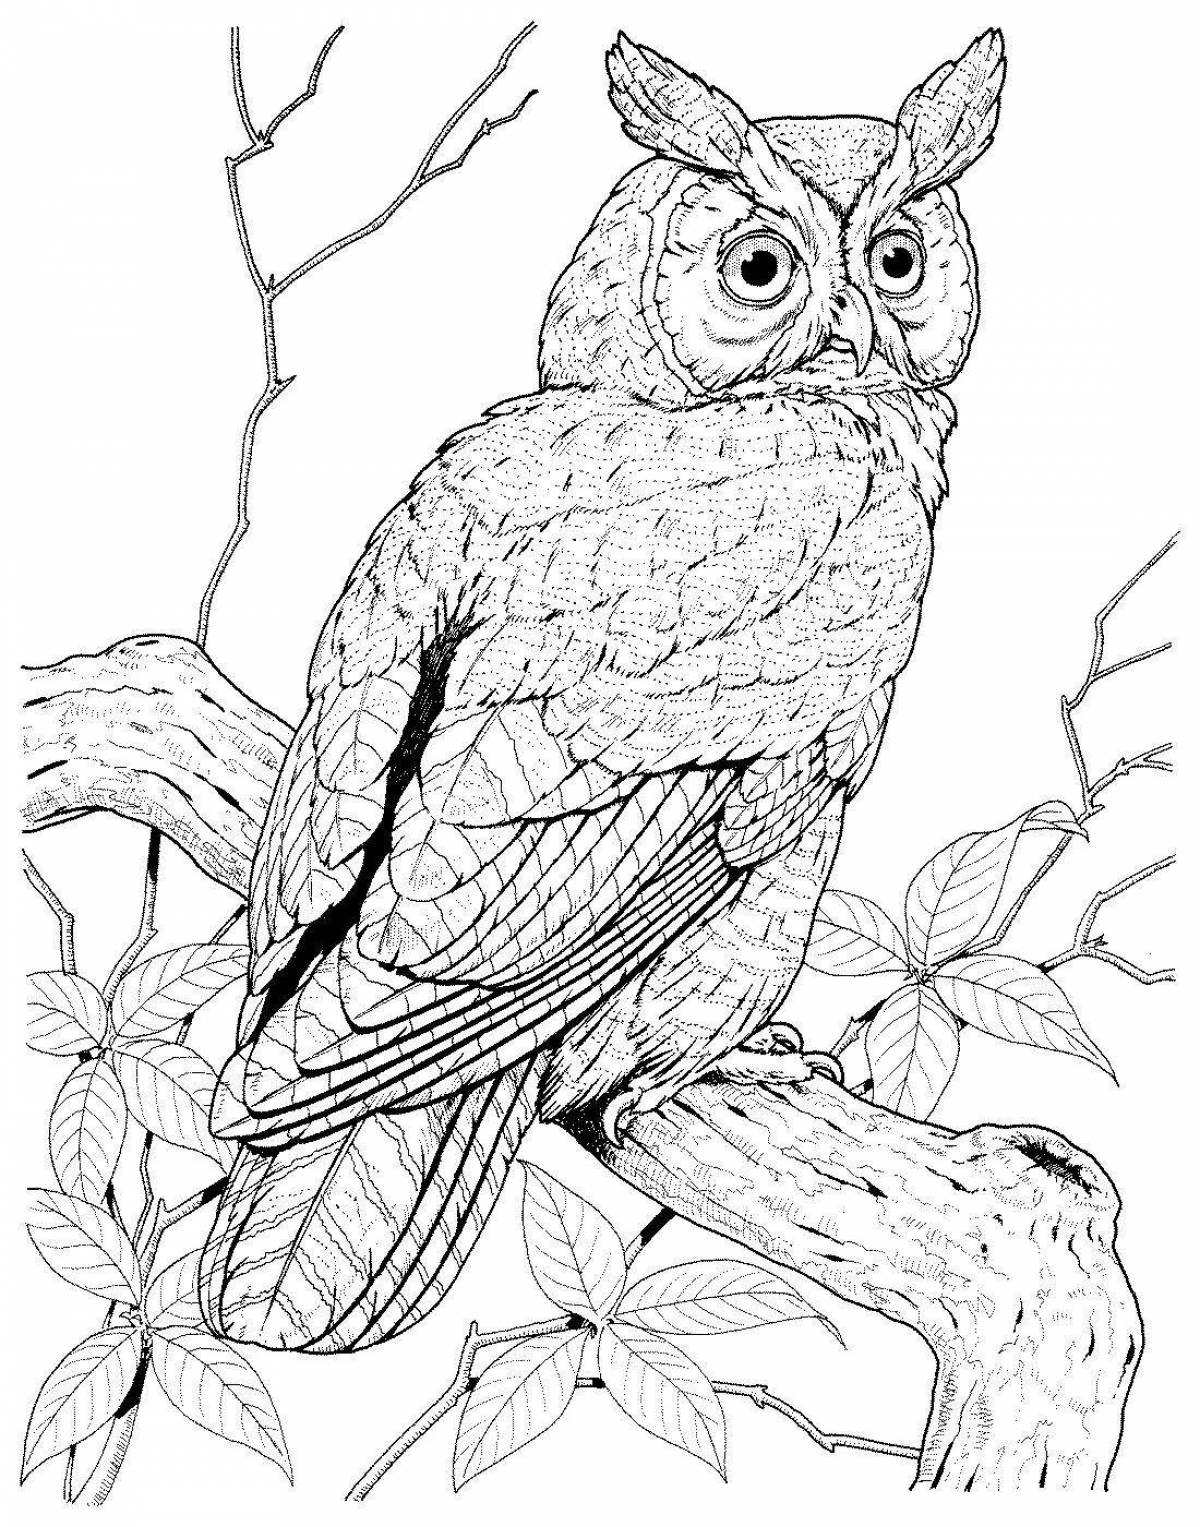 Fine coloring drawing of an owl